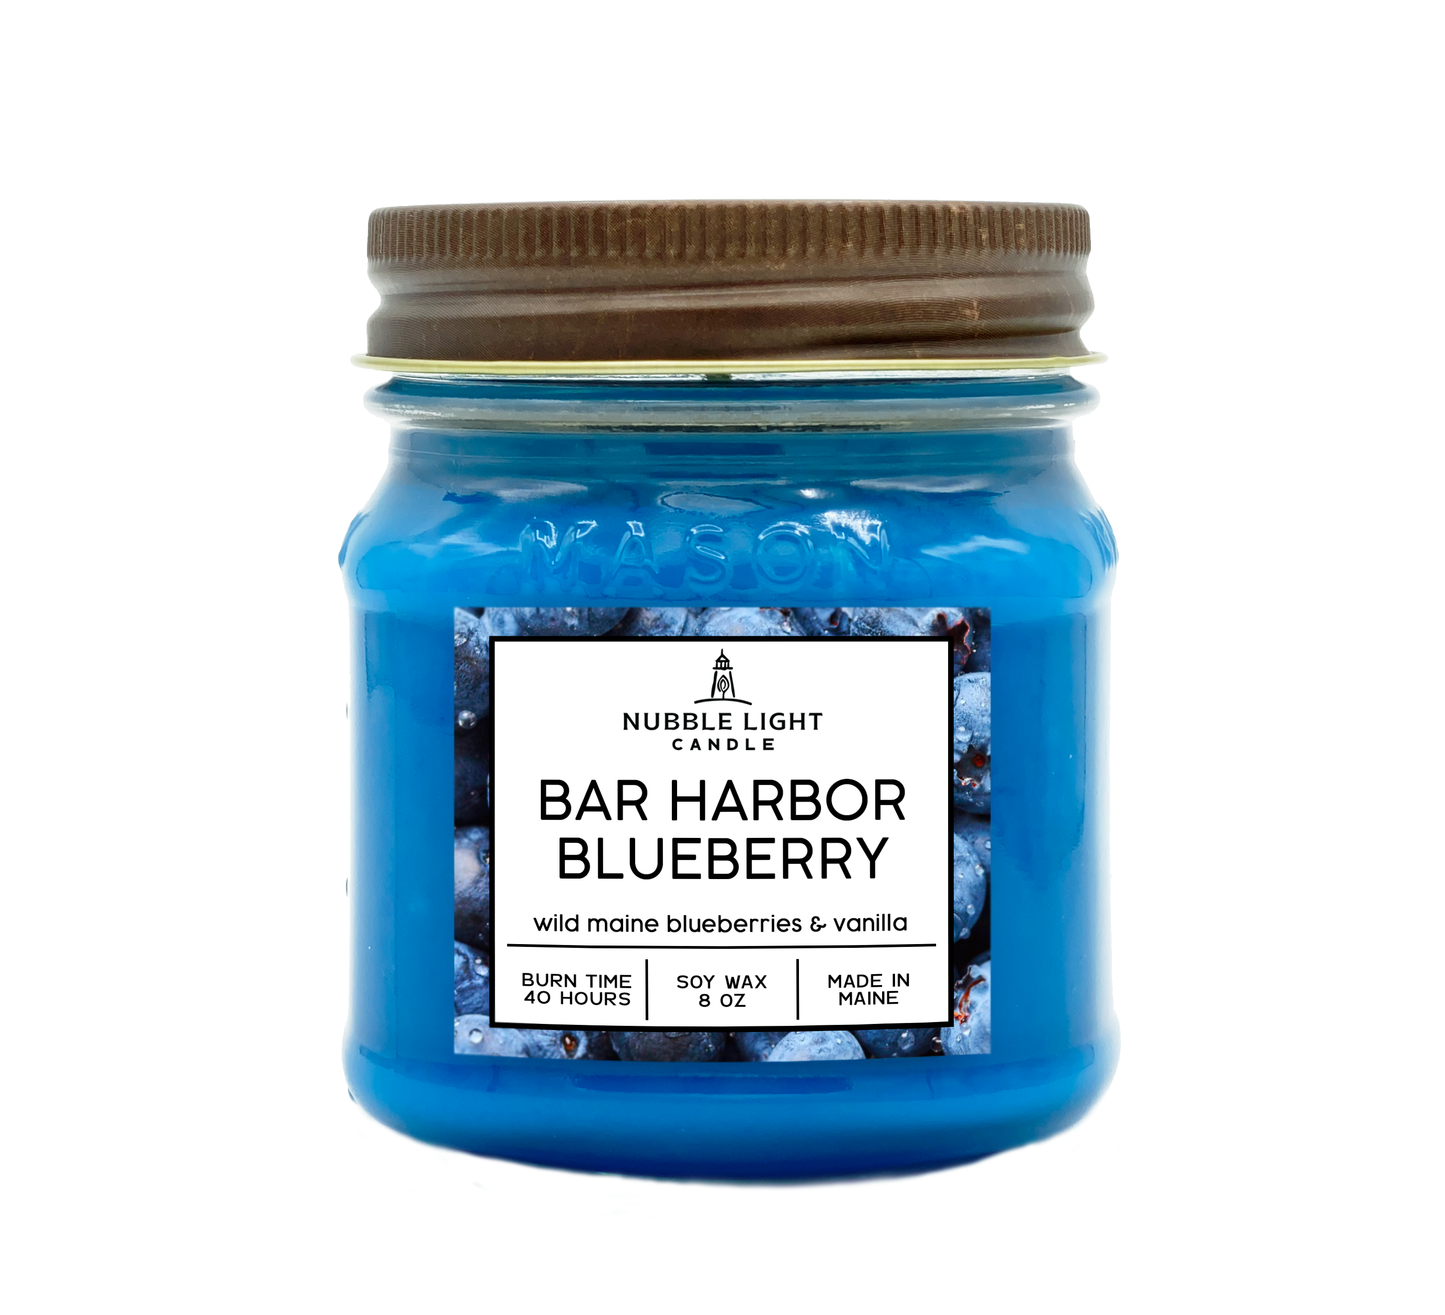 Bar Harbor Blueberry 8oz. Scented Soy Candle